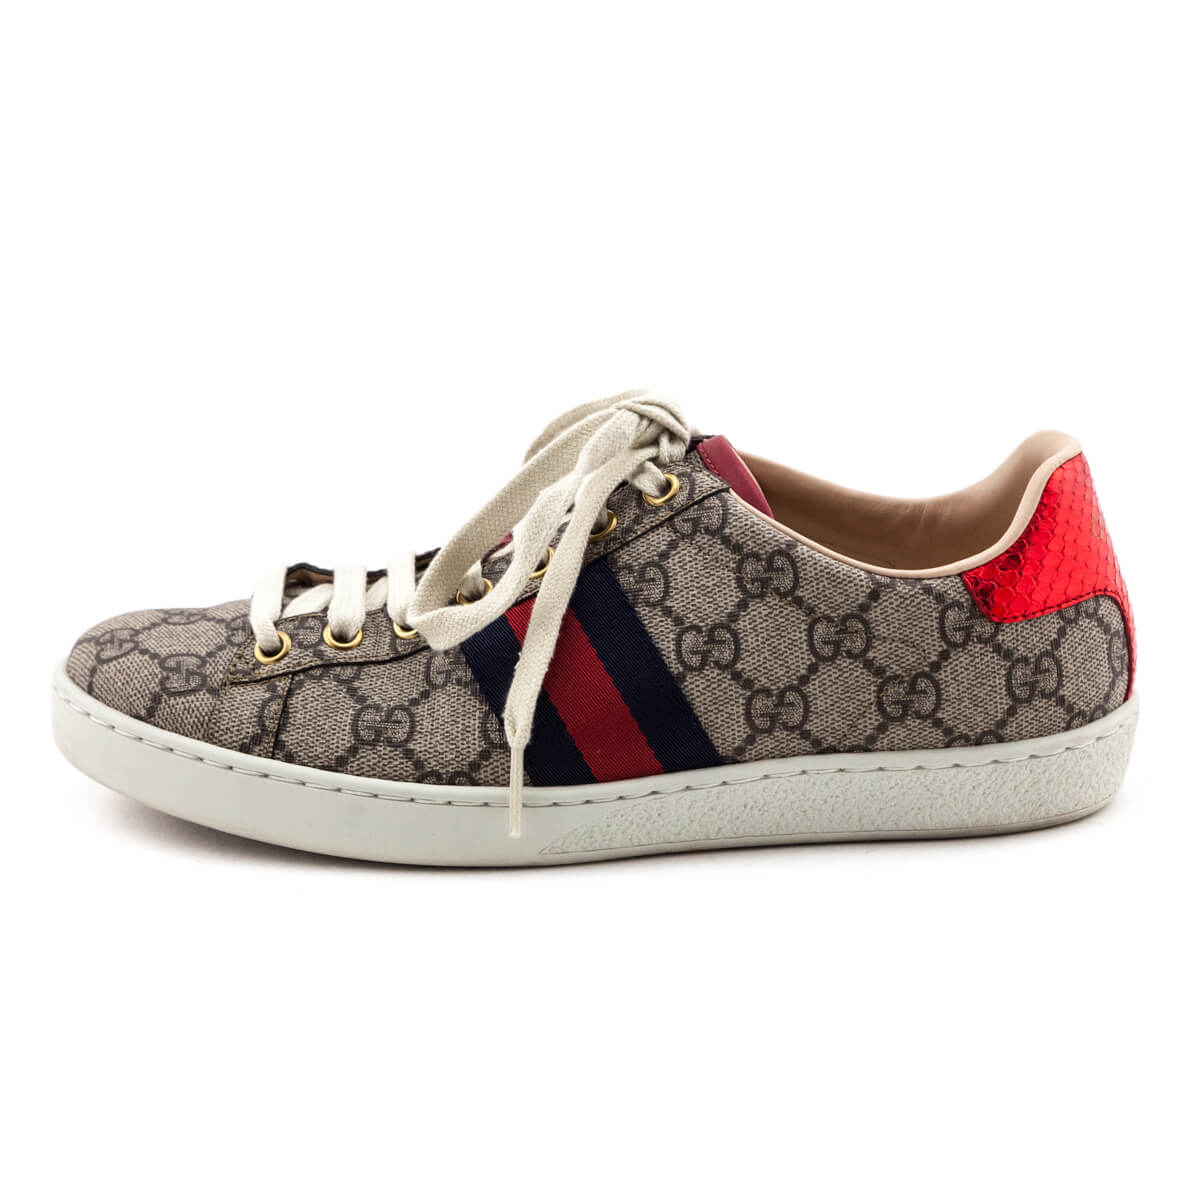 Gucci Blue & Red GG Supreme Ace Sneakers Size US 7.5 | EU 37.5 - Love that Bag etc - Preowned Authentic Designer Handbags & Preloved Fashions